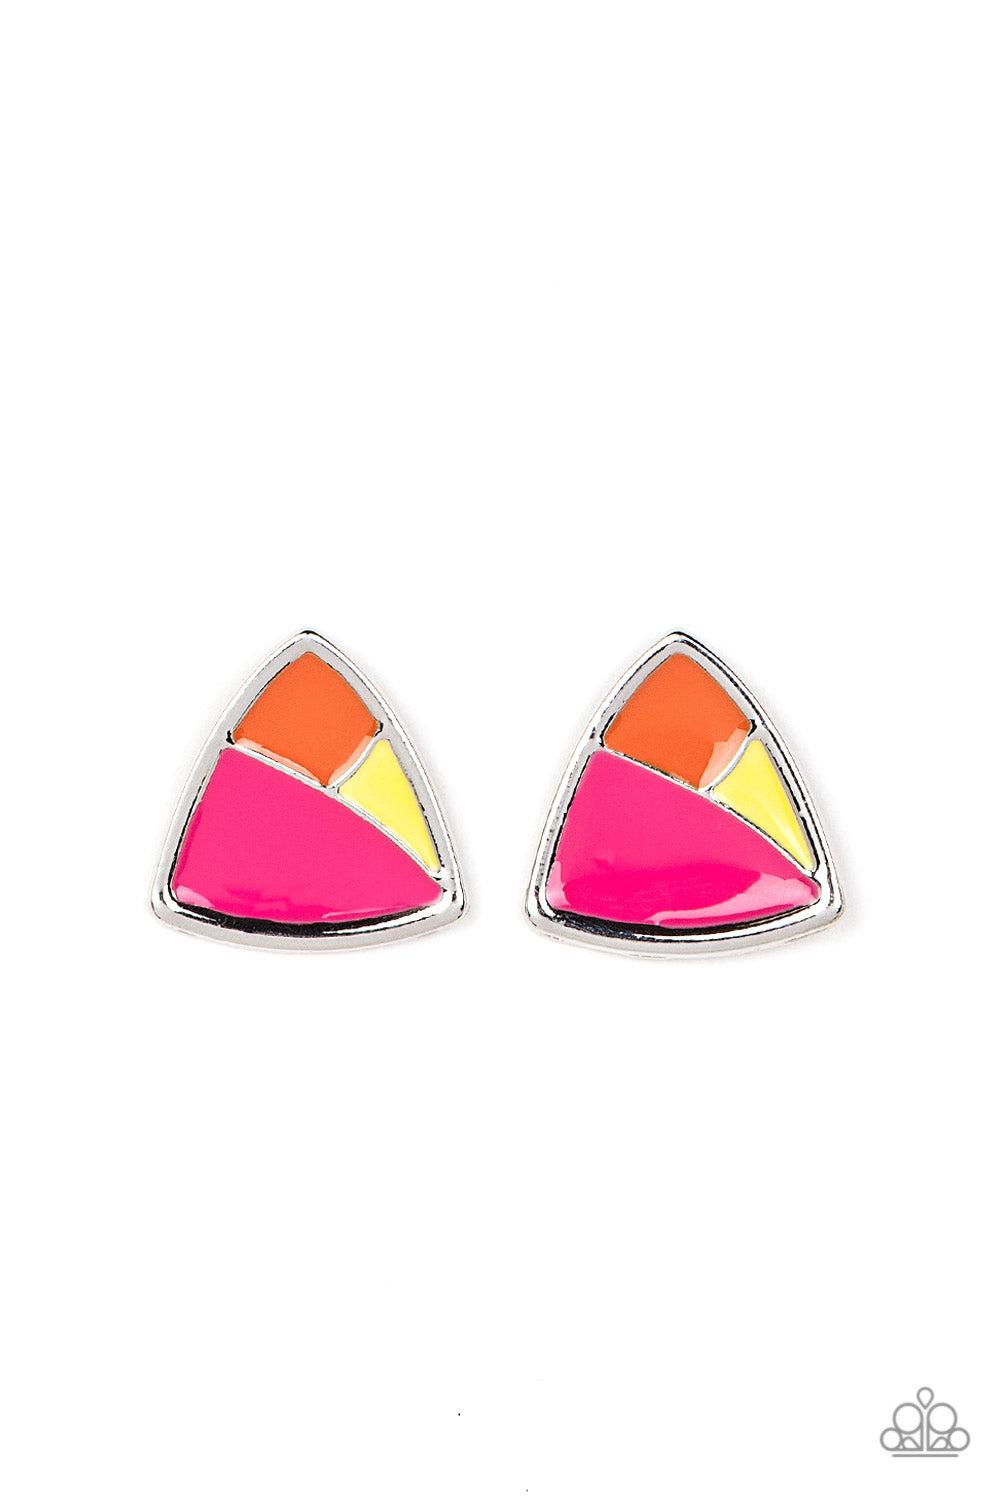 Kaleidoscopic Collision Multi Post Earrings - Paparazzi Accessories- lightbox - CarasShop.com - $5 Jewelry by Cara Jewels